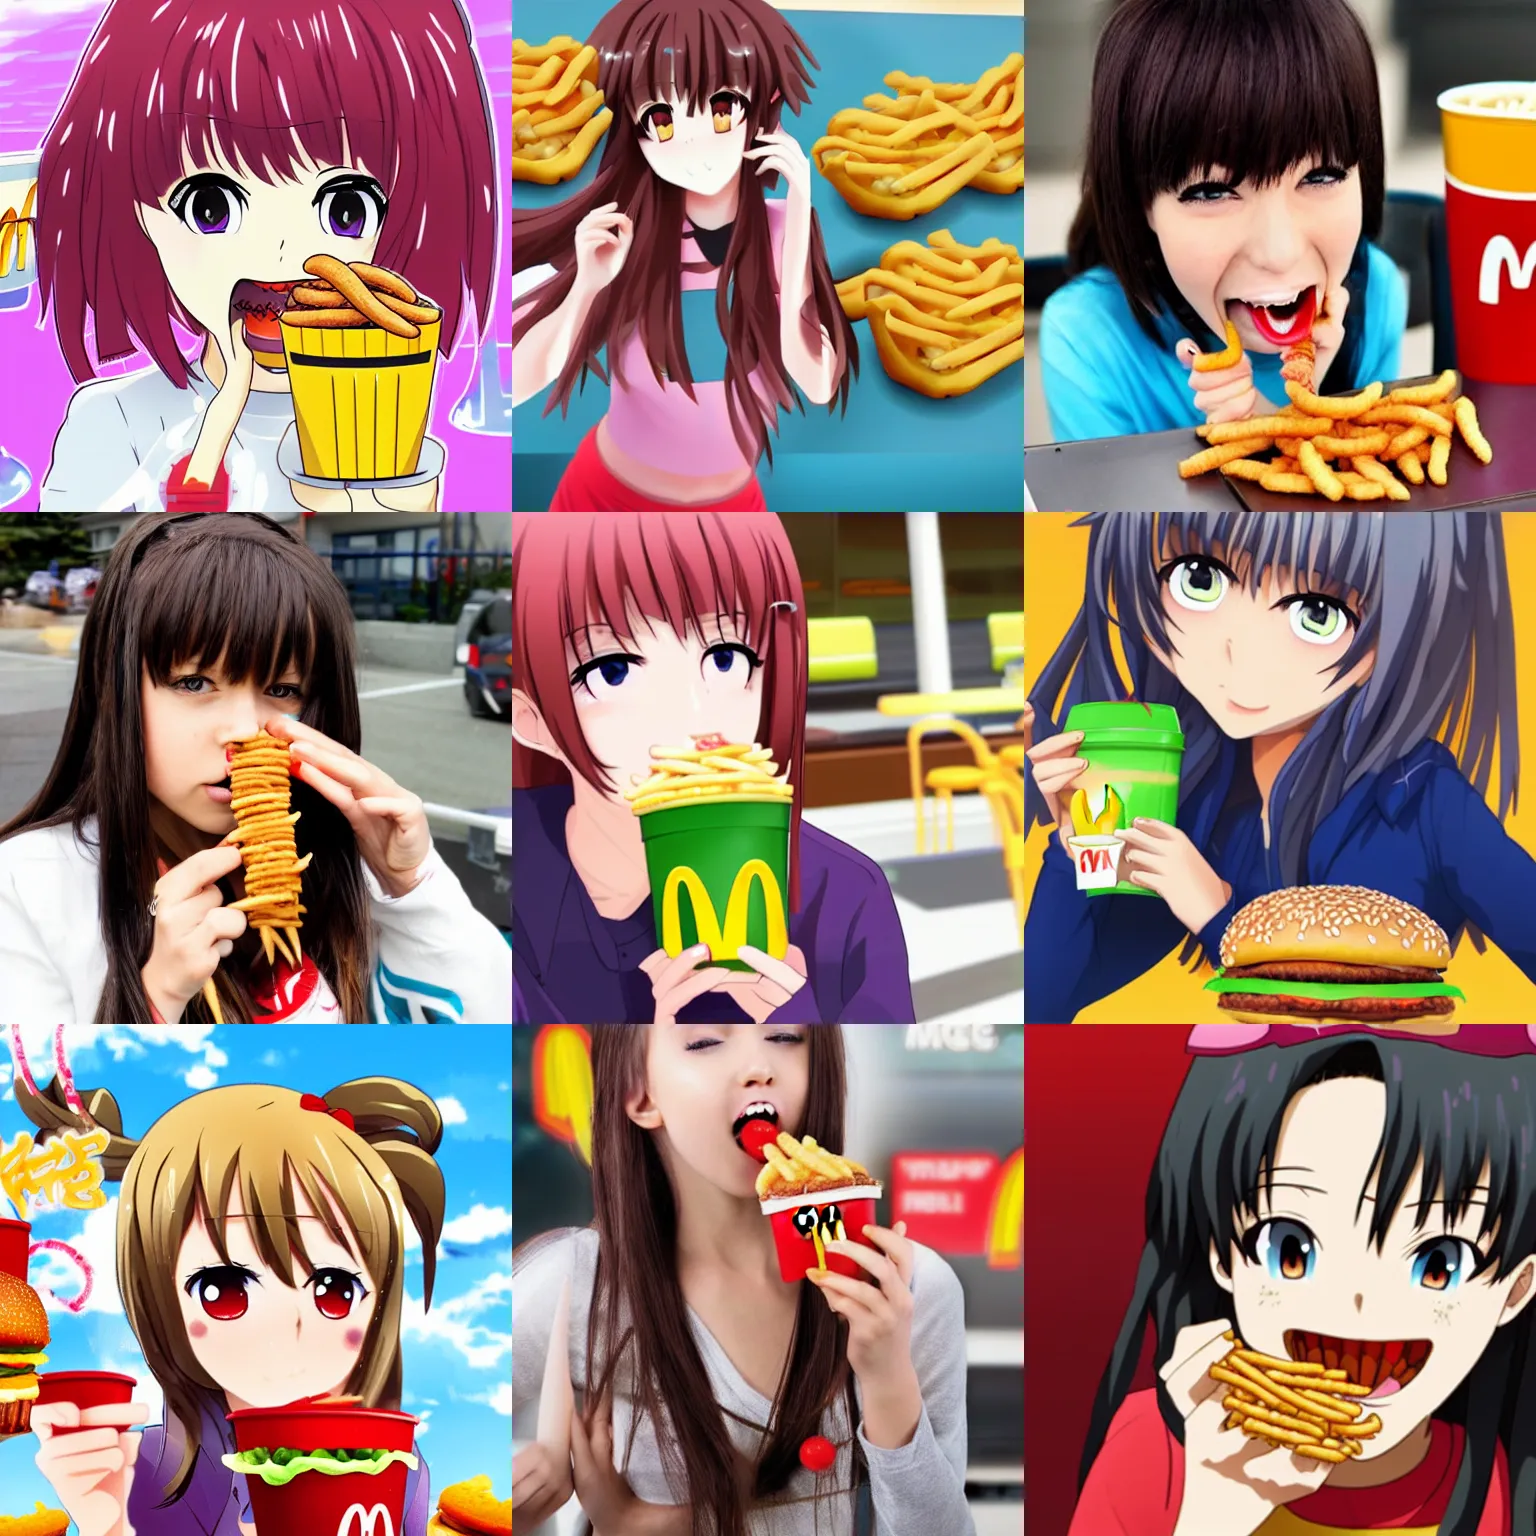 Prompt: anime girl eating worms at mcdonalds in style mcdonalds